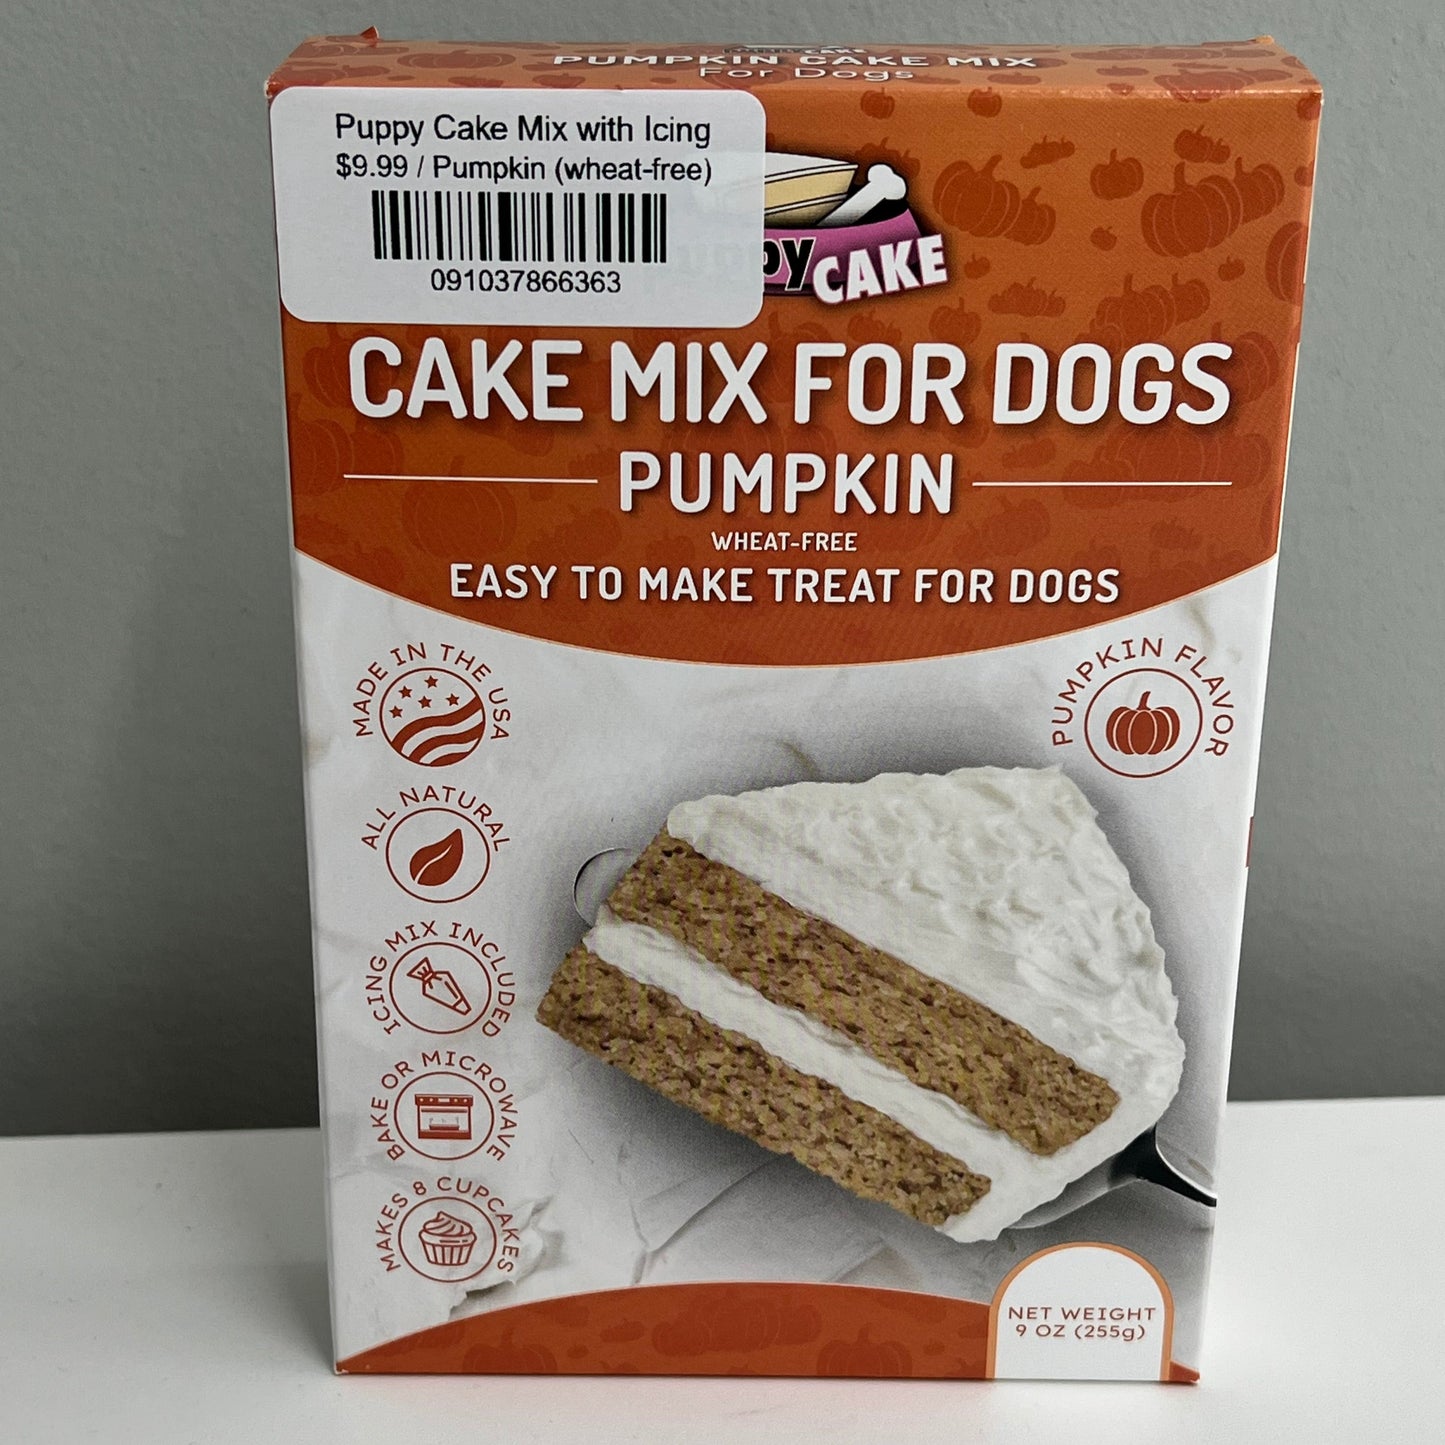 Puppy Cake Mix with Icing